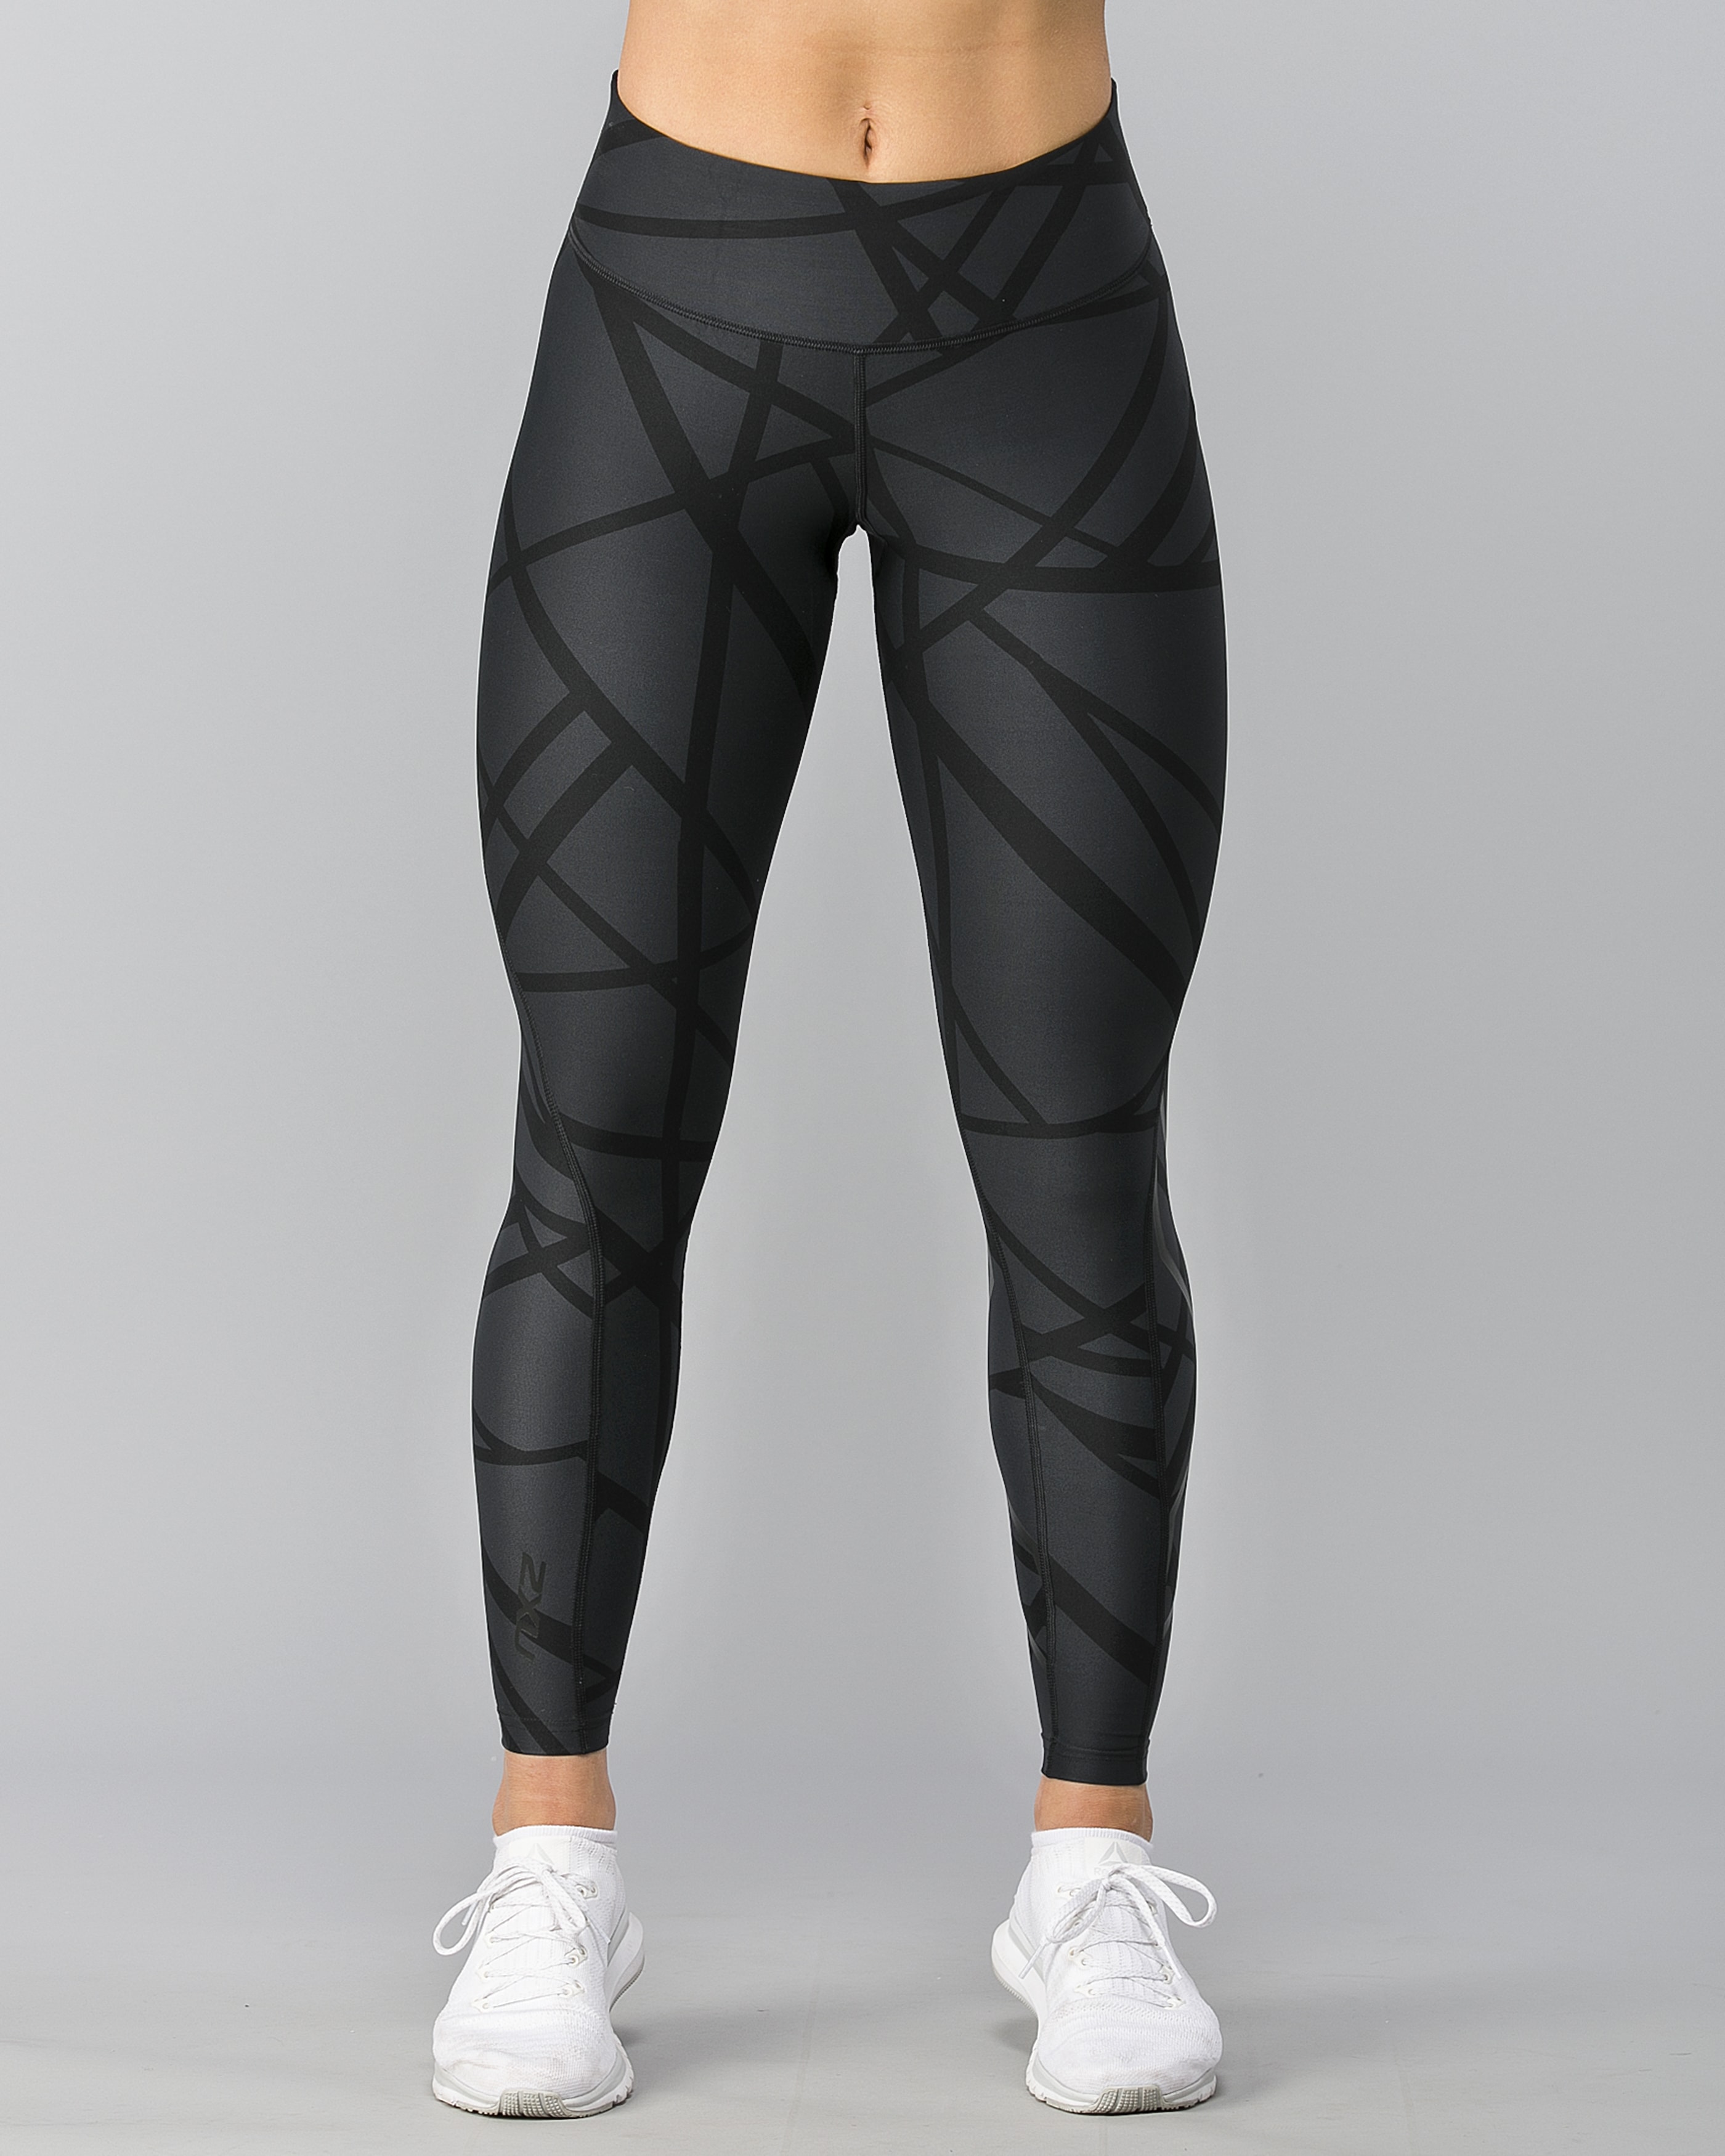 frugter strand udstødning 2XU Print Mid-Rise Comp Tights - Paint Strokes/Nero - Tights.no